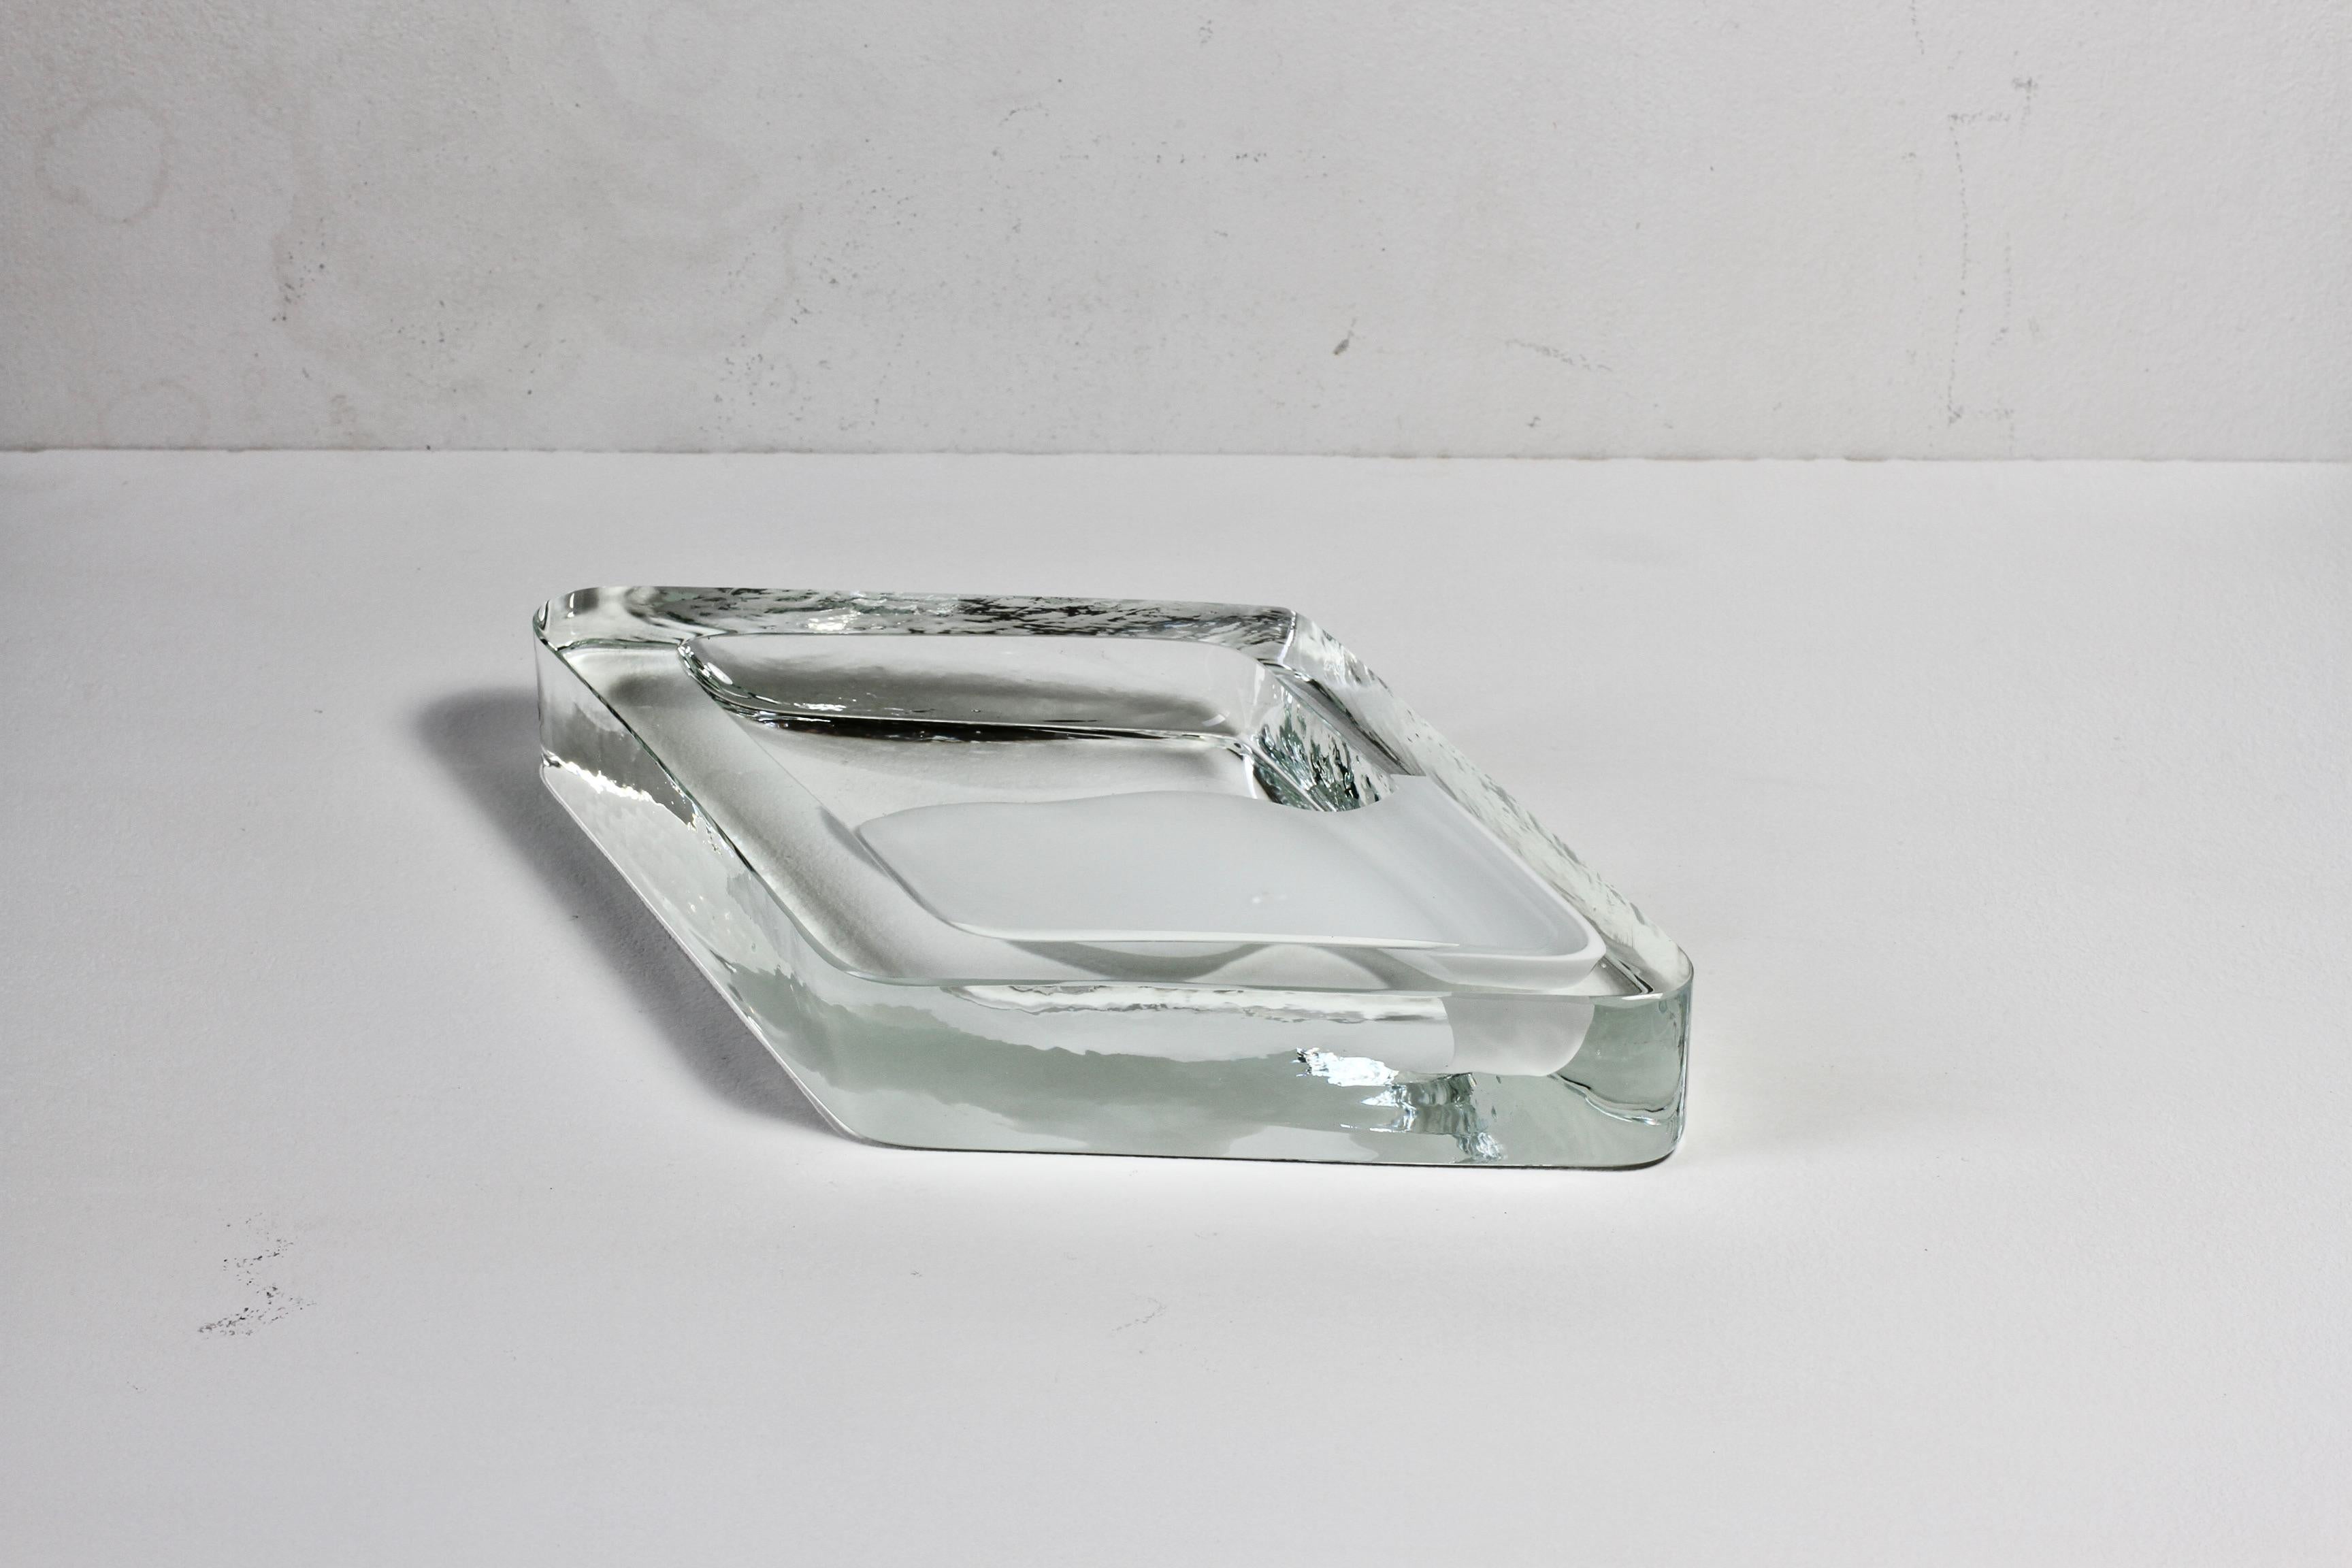 Huge Cenedese Italian Rhombus White and Clear Murano Glass Bowl, Dish, Ashtray For Sale 3